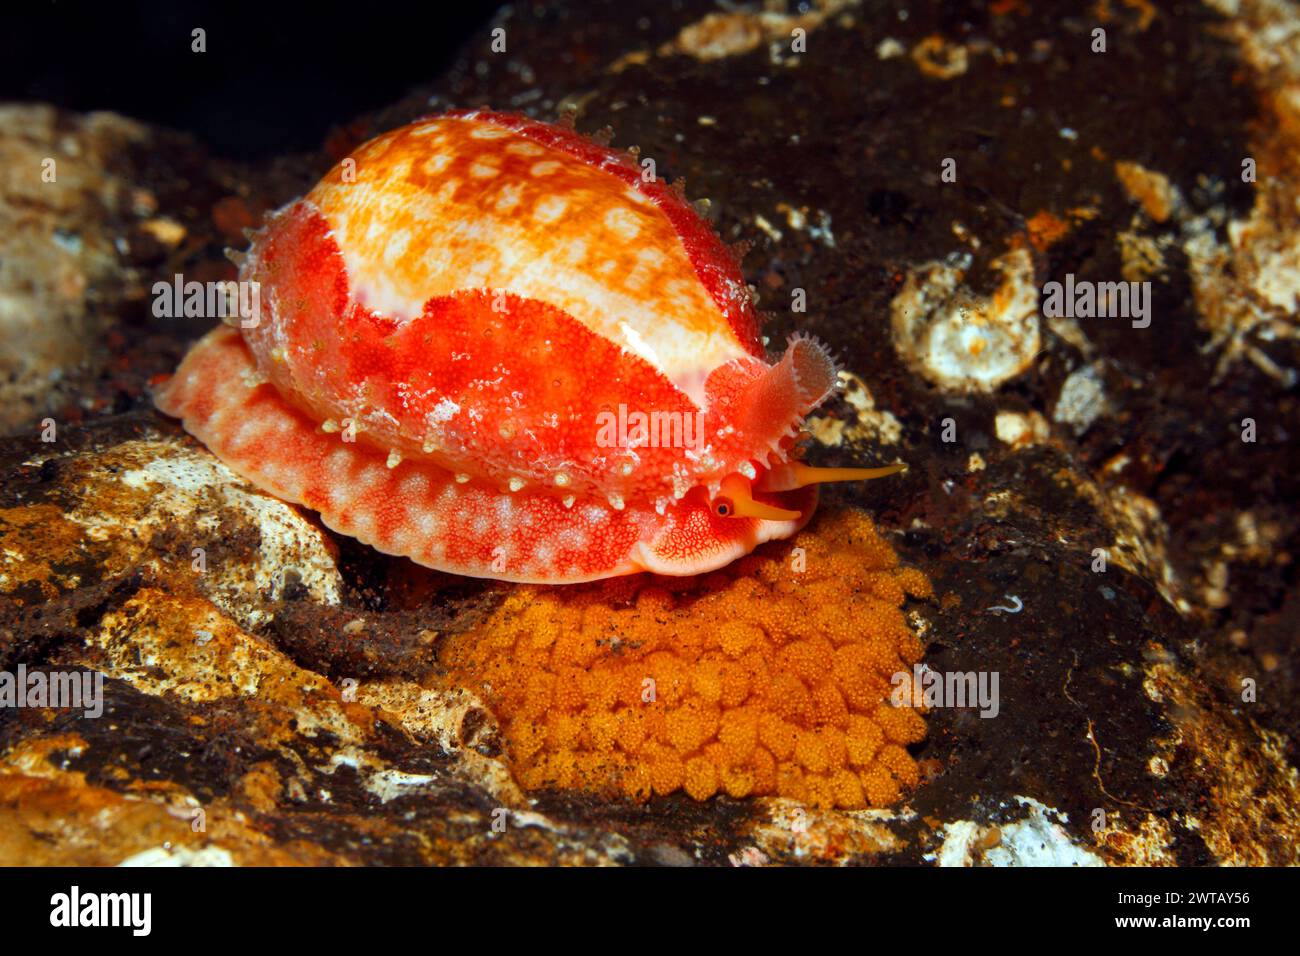 Chinese Cowry or Cowrie, Ovatipsa chinensis, with orange egg mass. Previously described as Cypraea chinensis and Cribraria chinensis. Tulamben, Bali Stock Photo